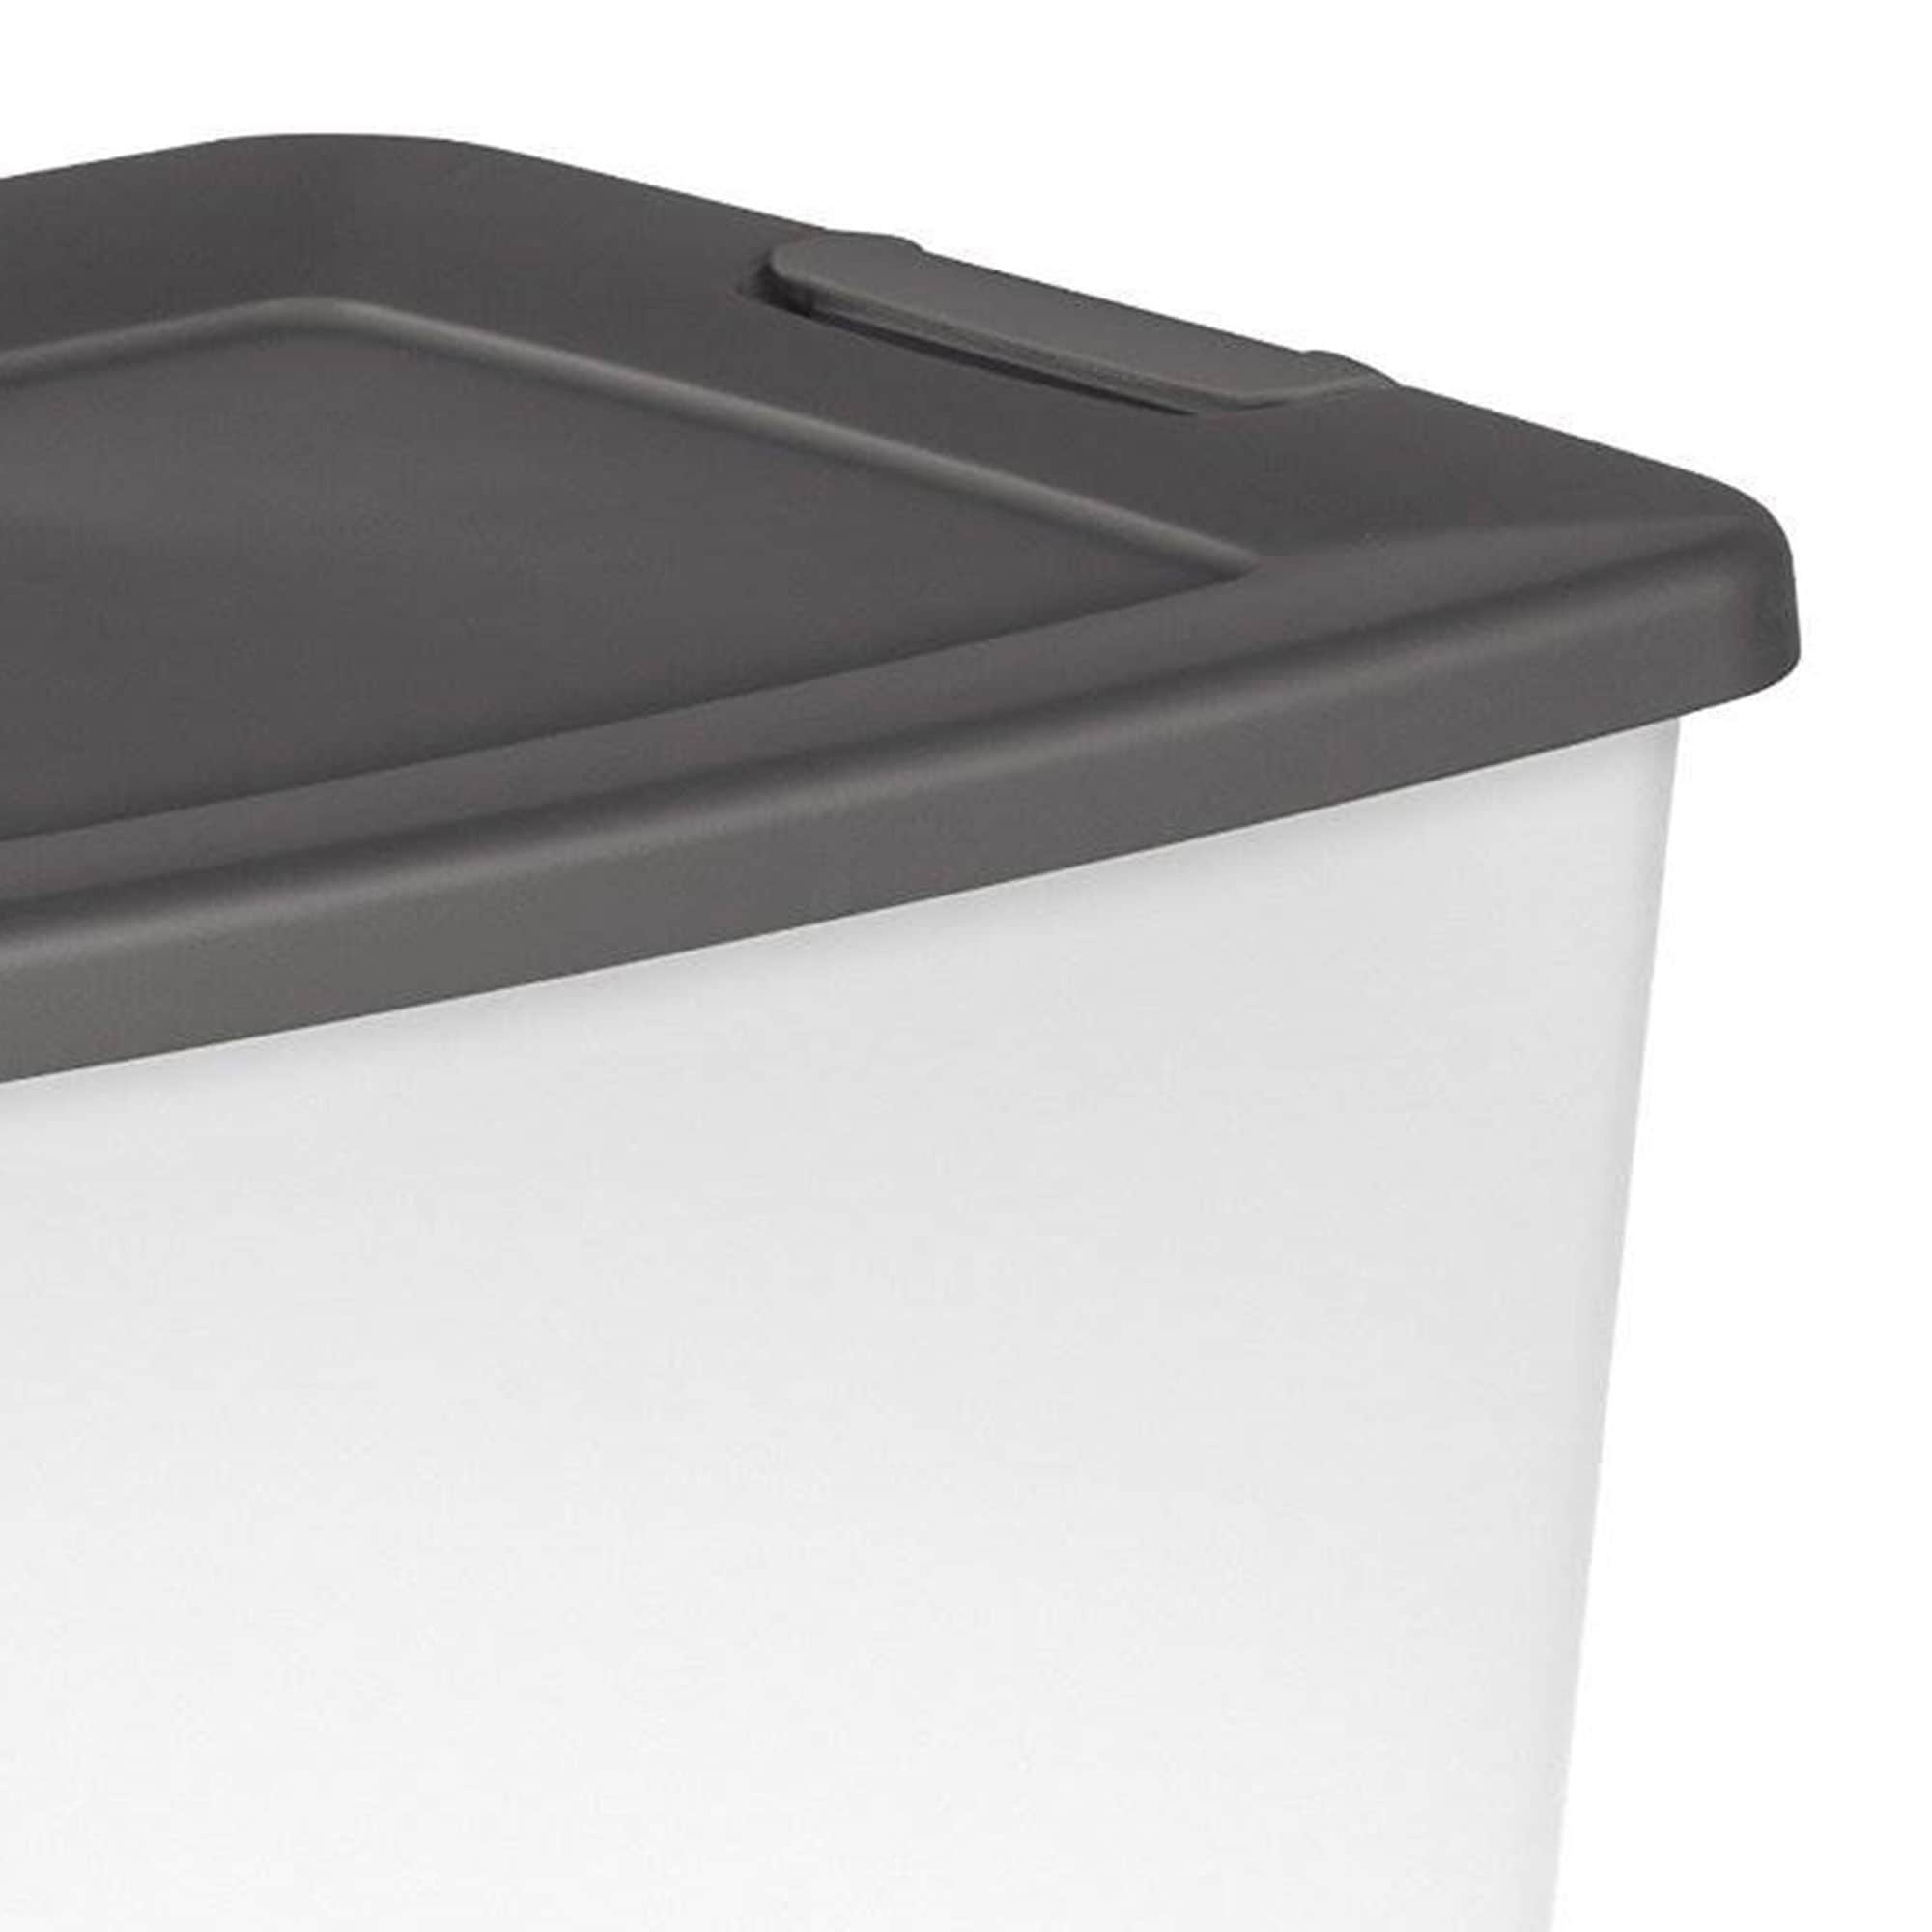 Sterilite - 50 Quart Clear Latched Plastic Storage Container (6 Pack)